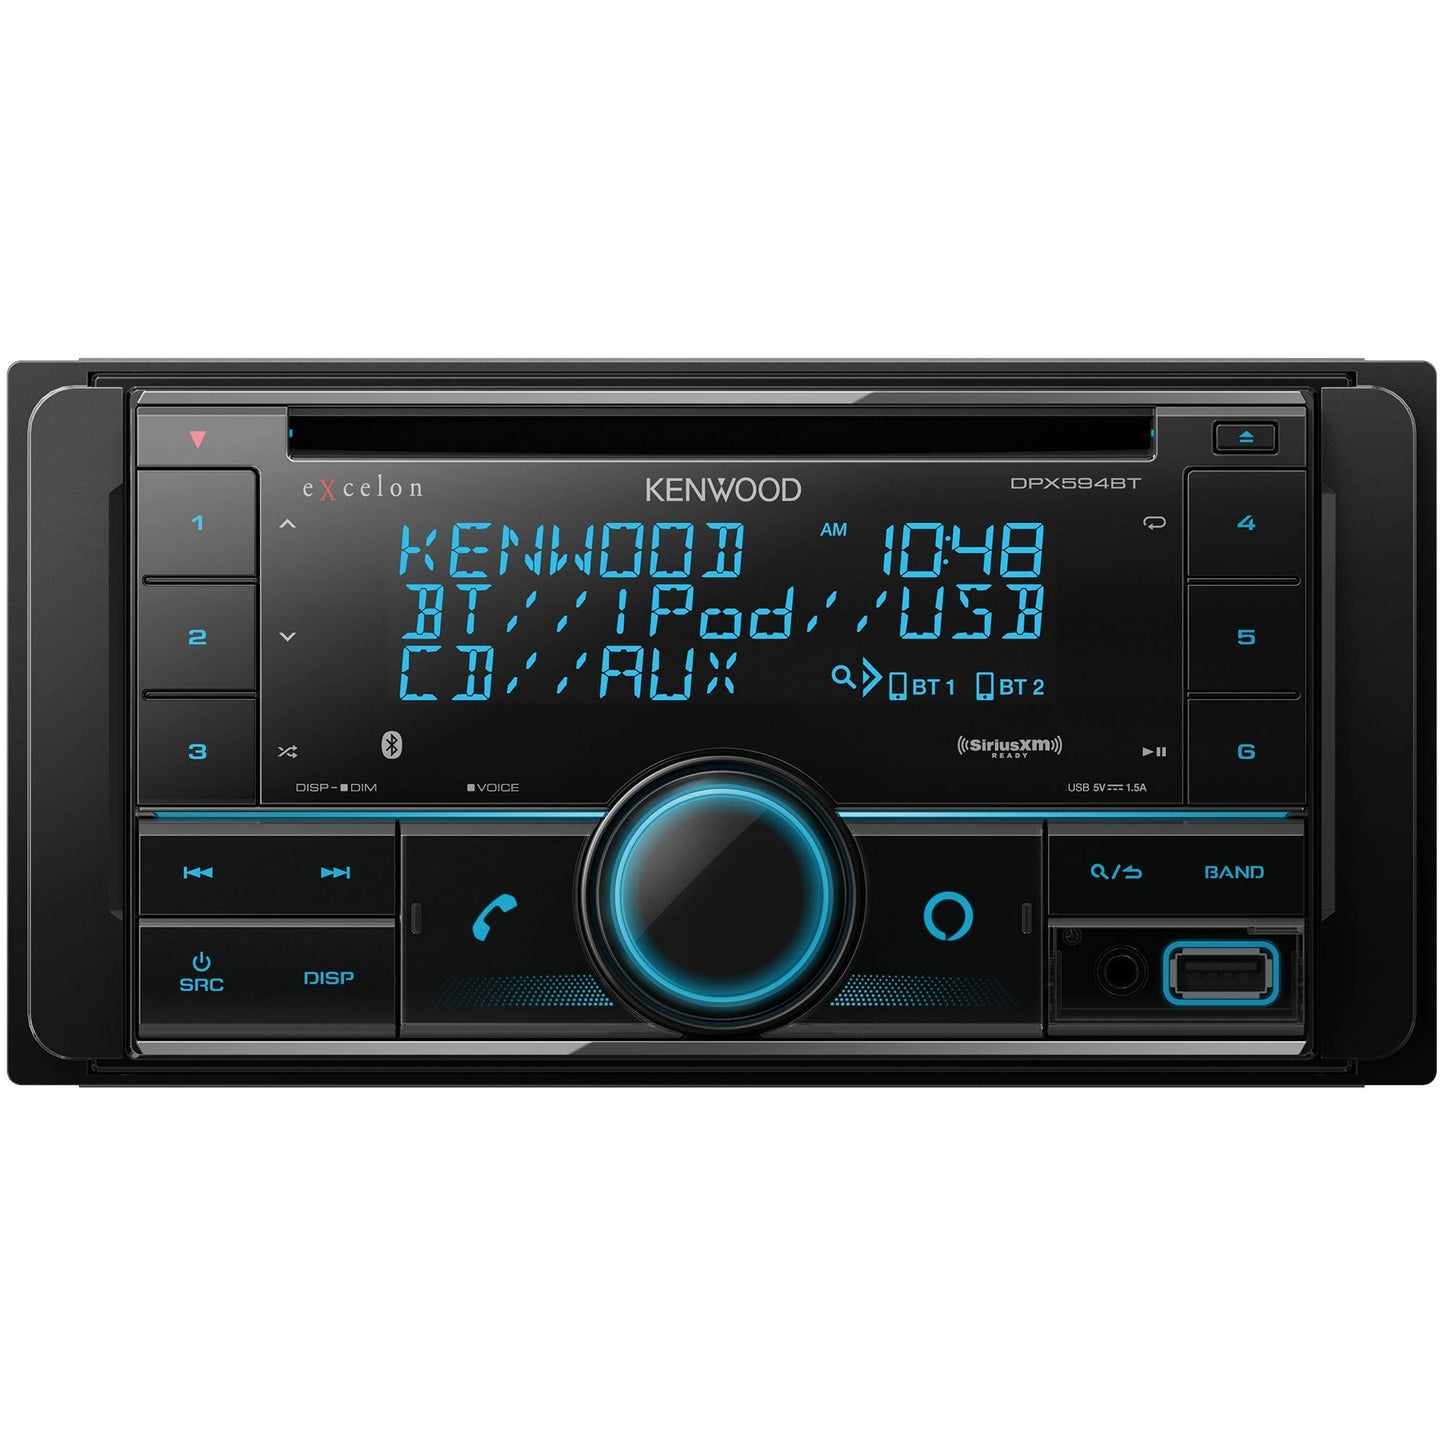 Kenwood DPX594BT Excelon AM FM CD Receiver with Bluetooth | Amazon Alexa Built-In